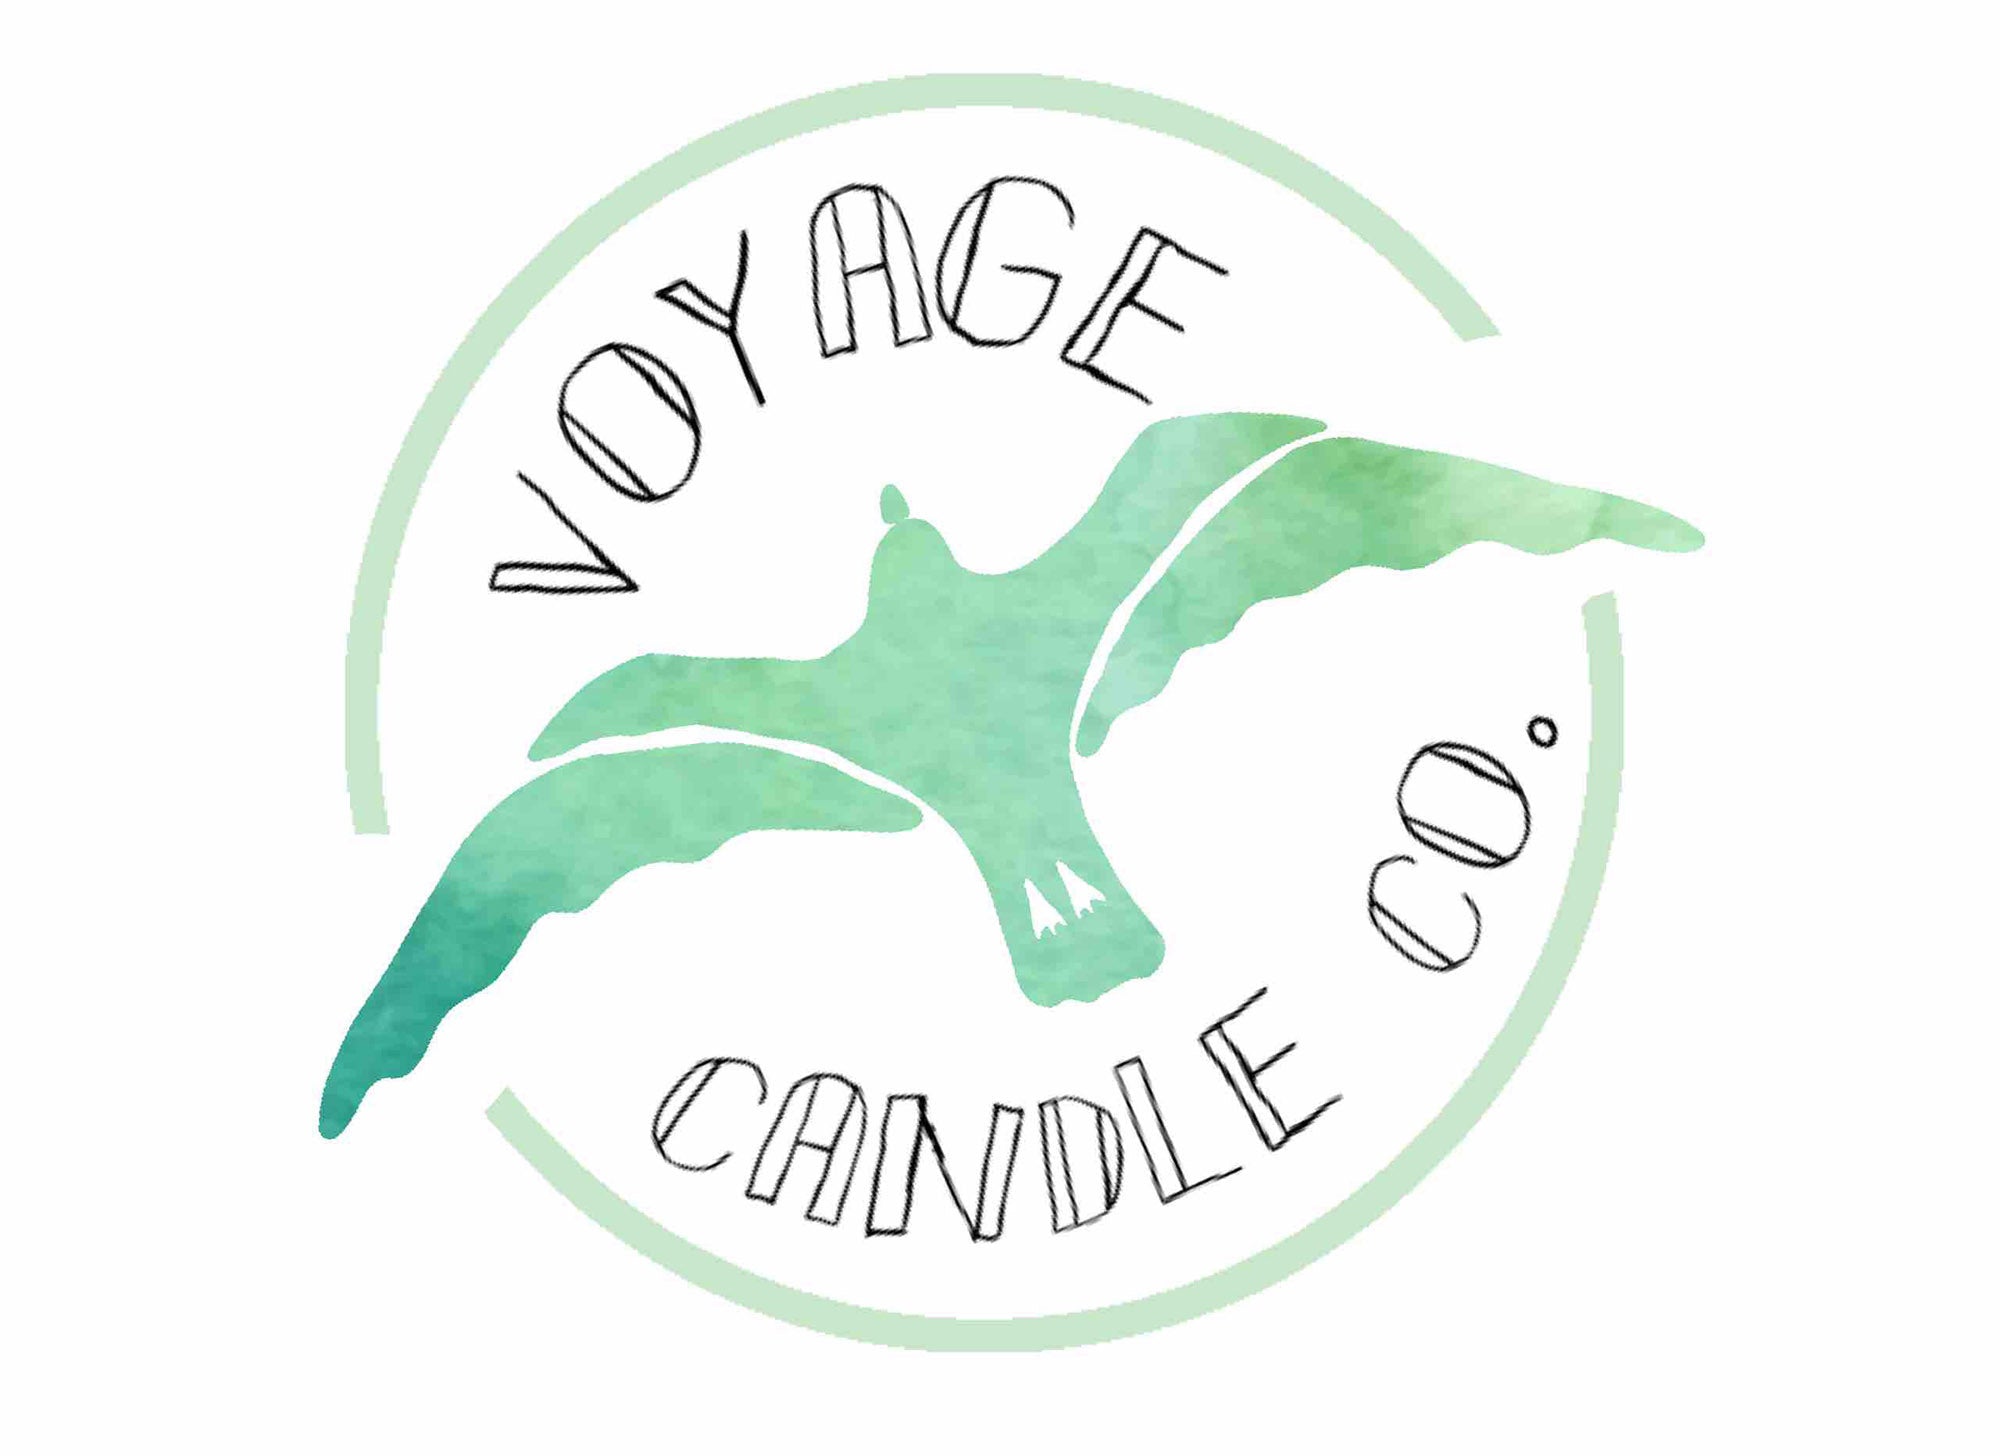 Voyage Candle Co.